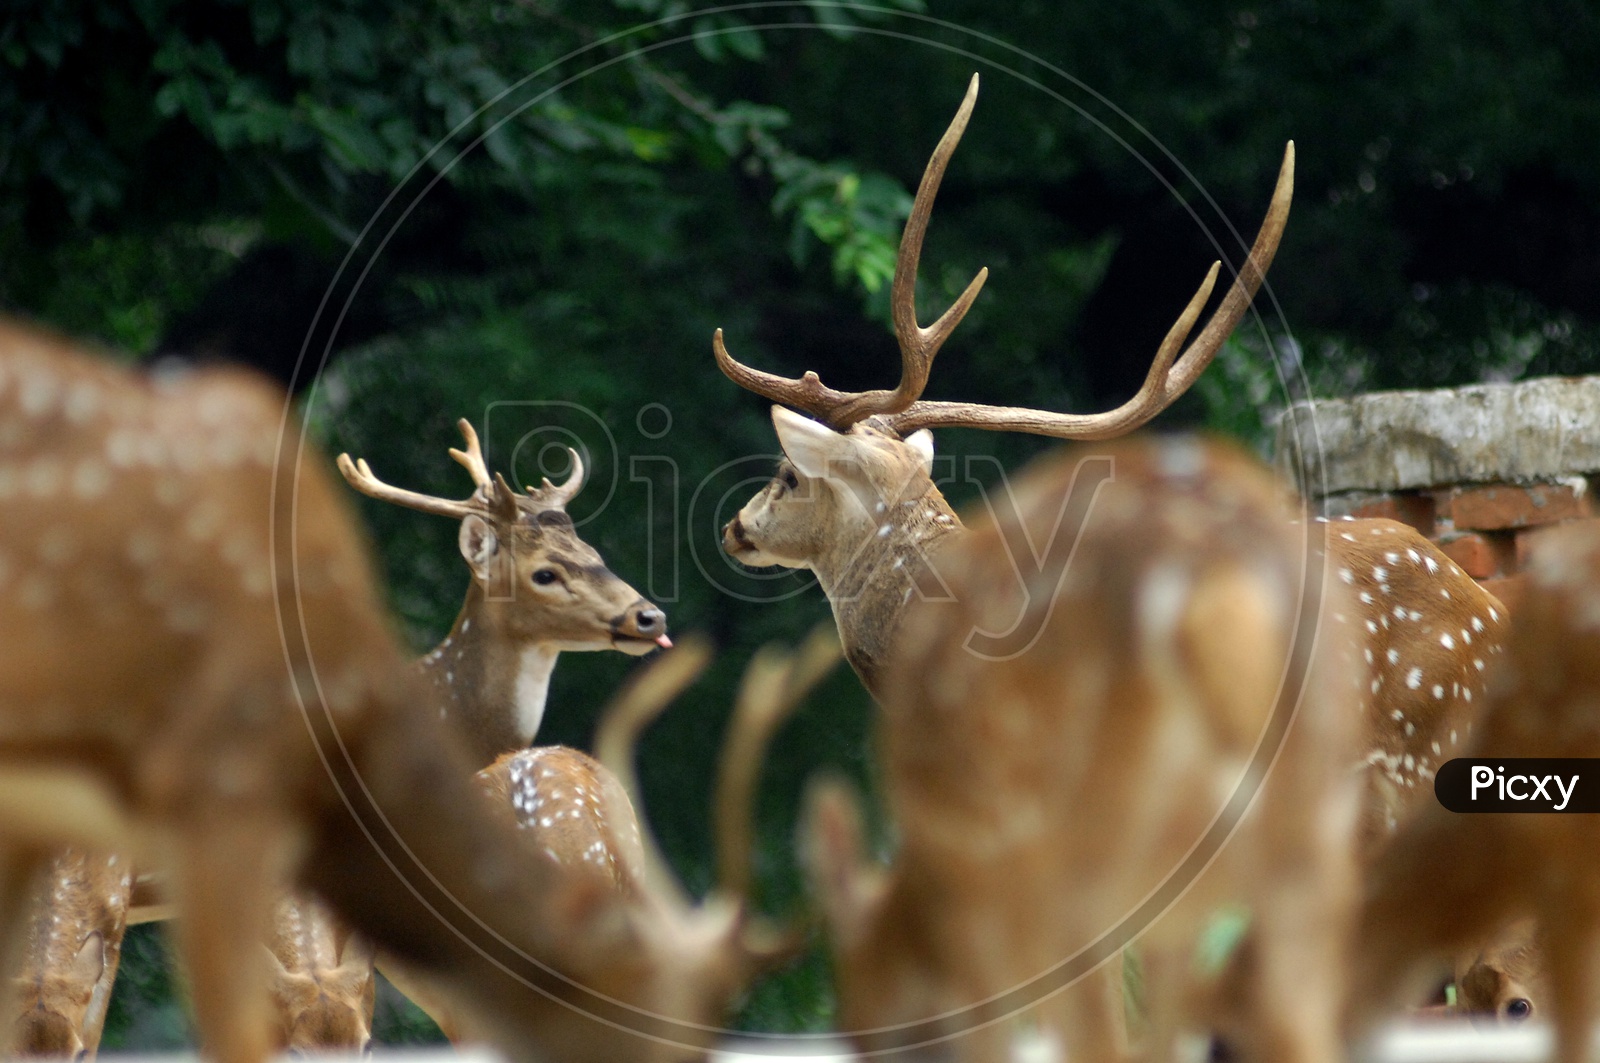 A White tailed deer among the herd